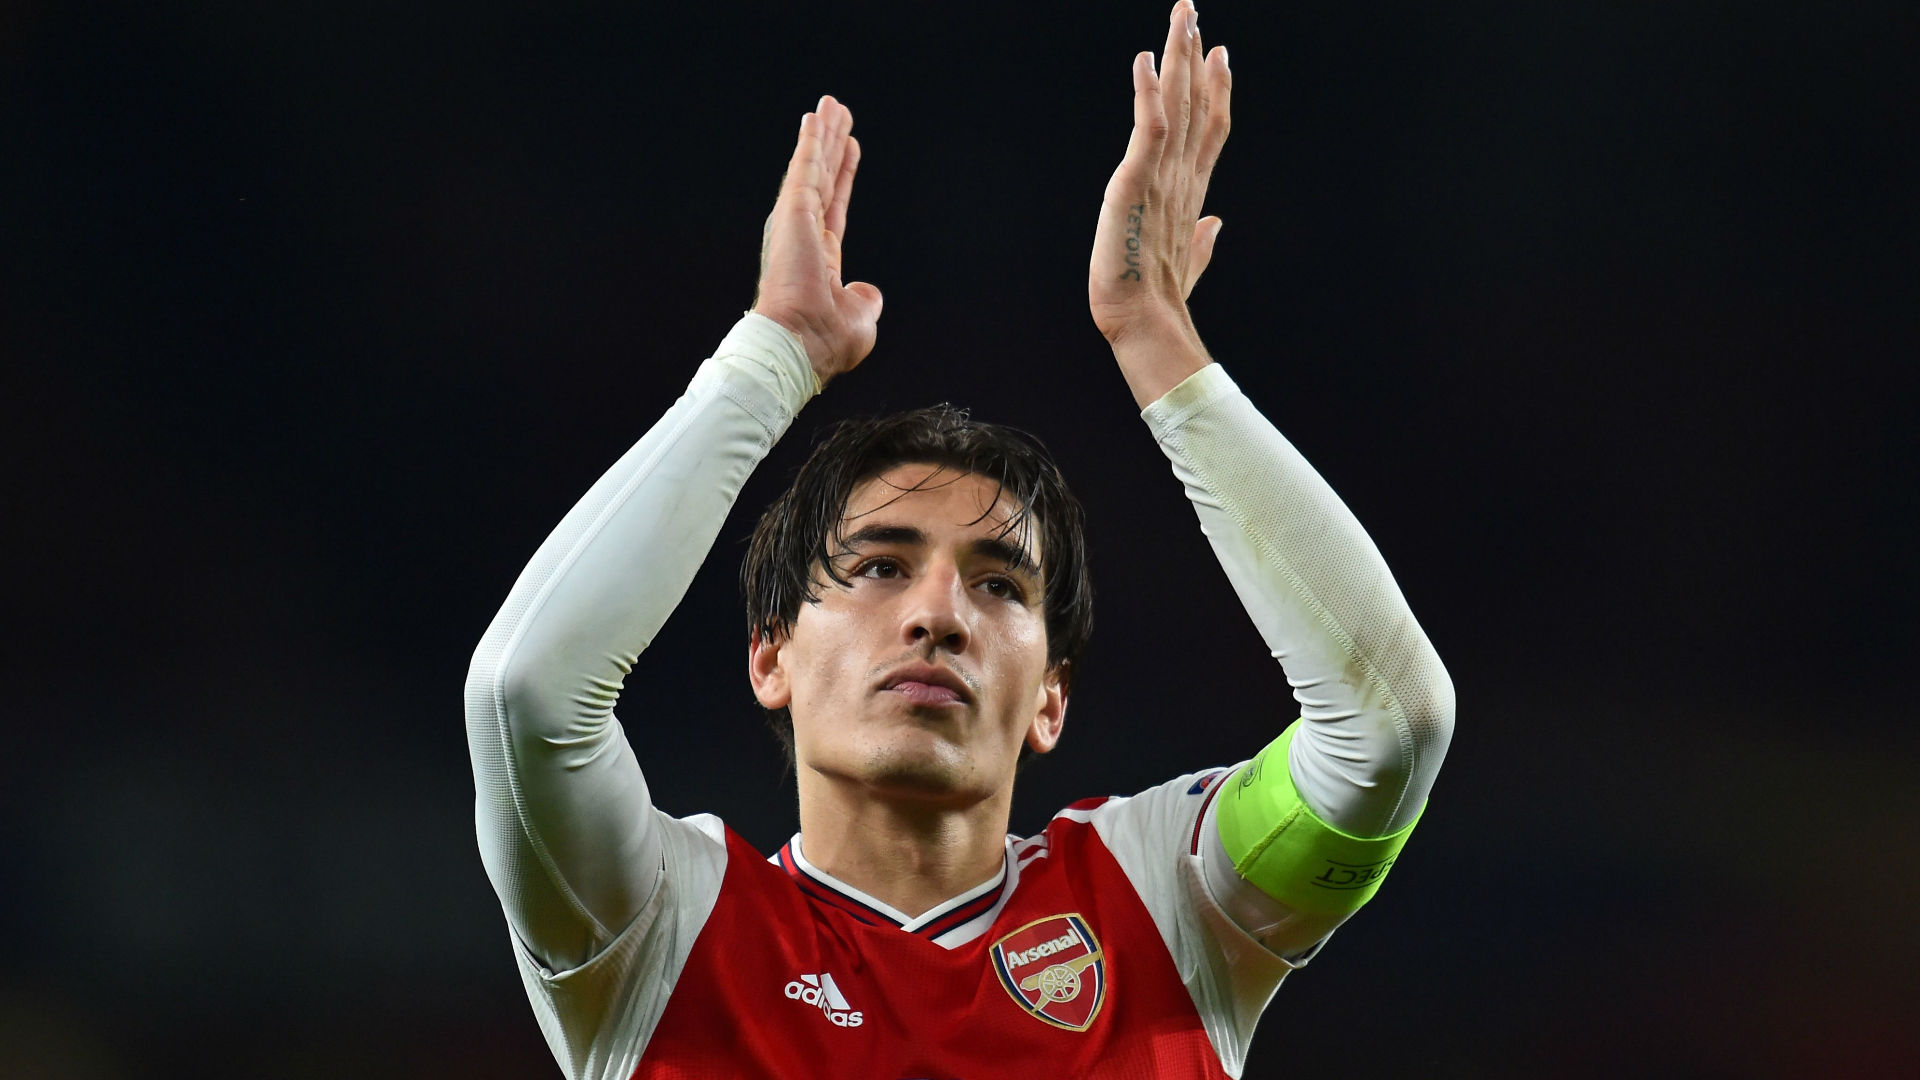 Bellerin: The world would be 'a much better place' if social media trolls were held accountable for their actions